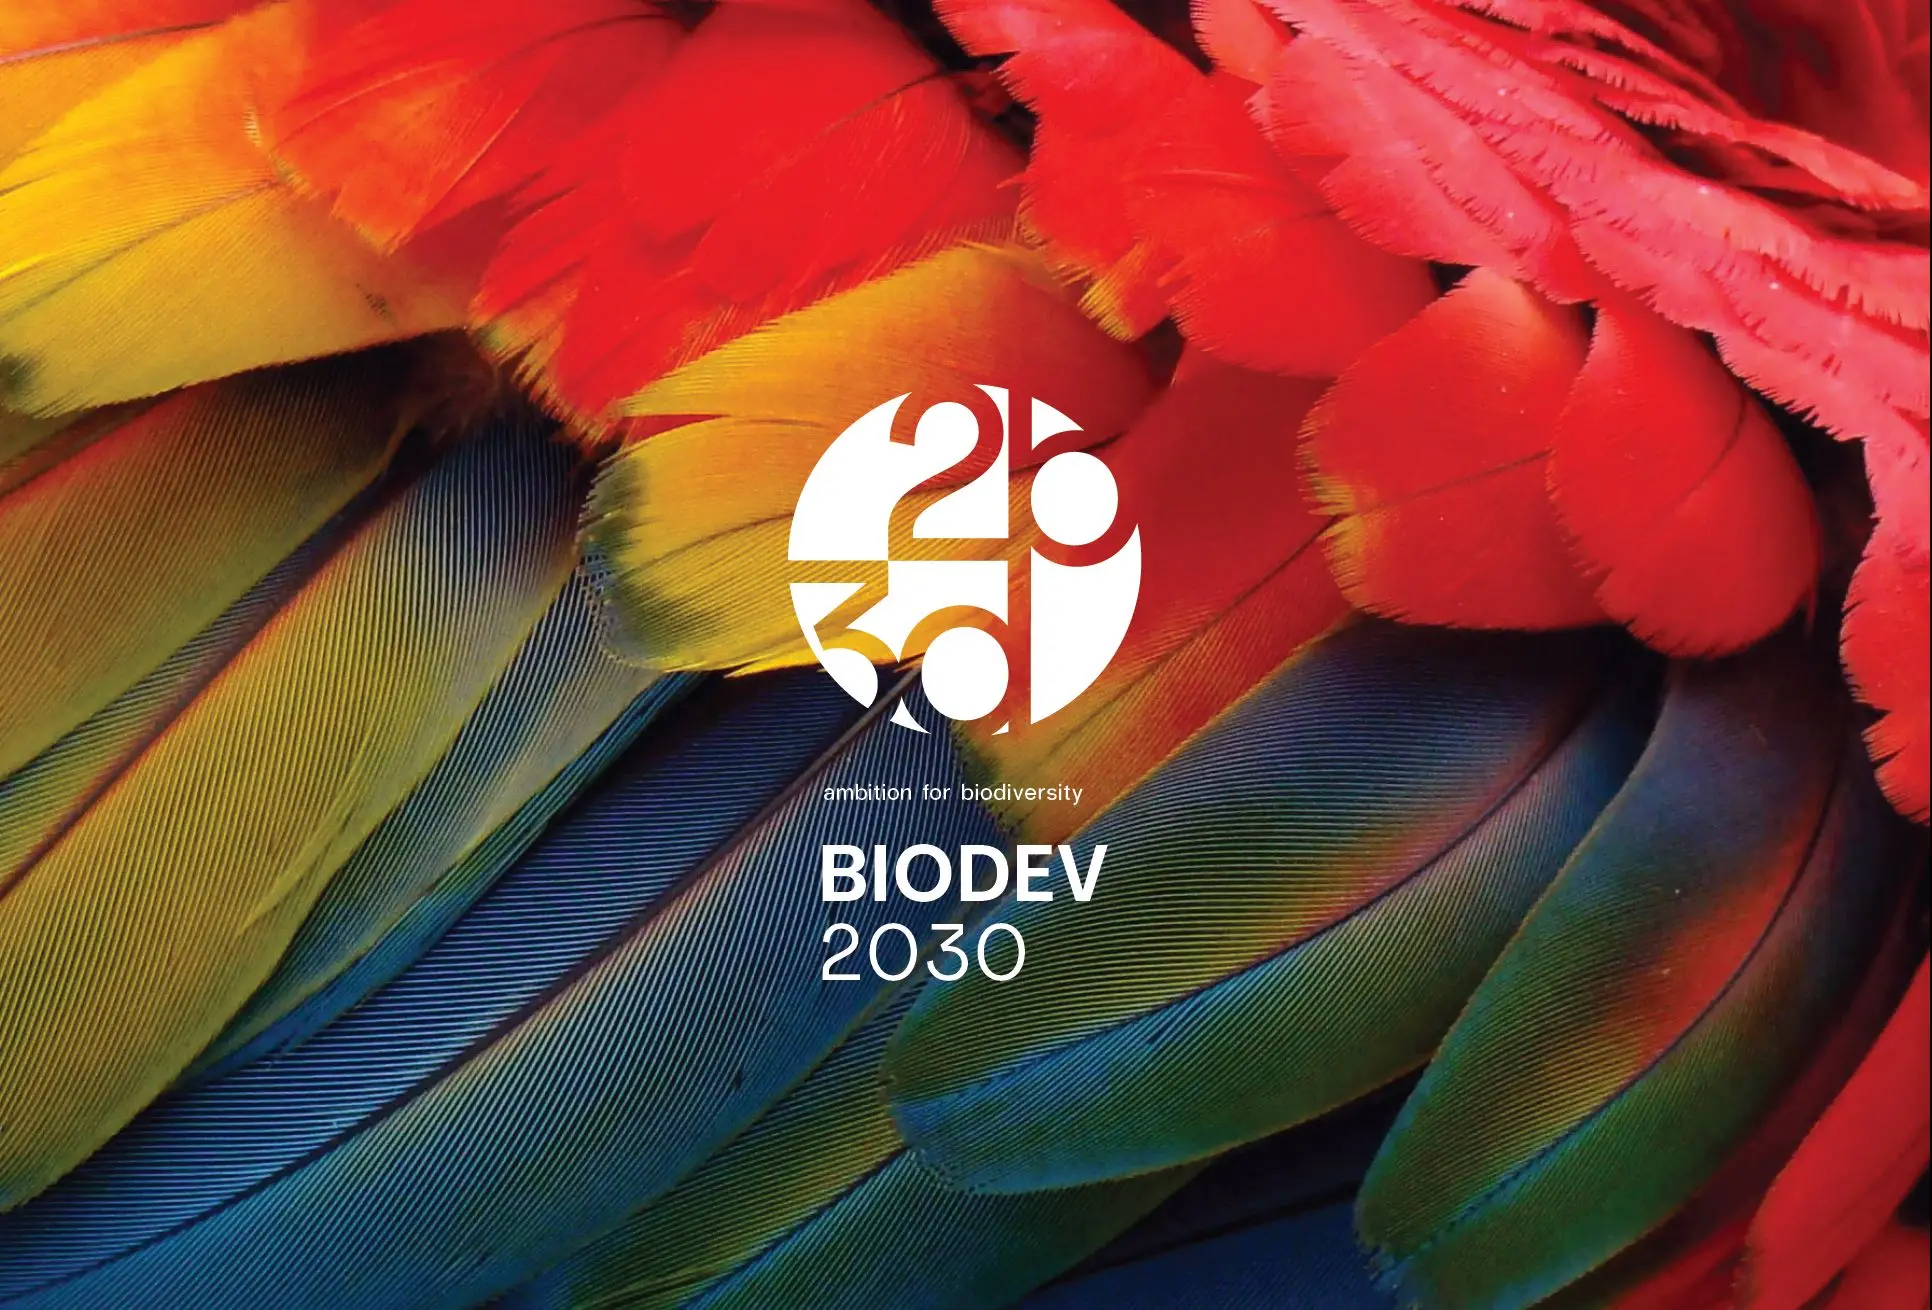 BIODEV logo on colourful feathers